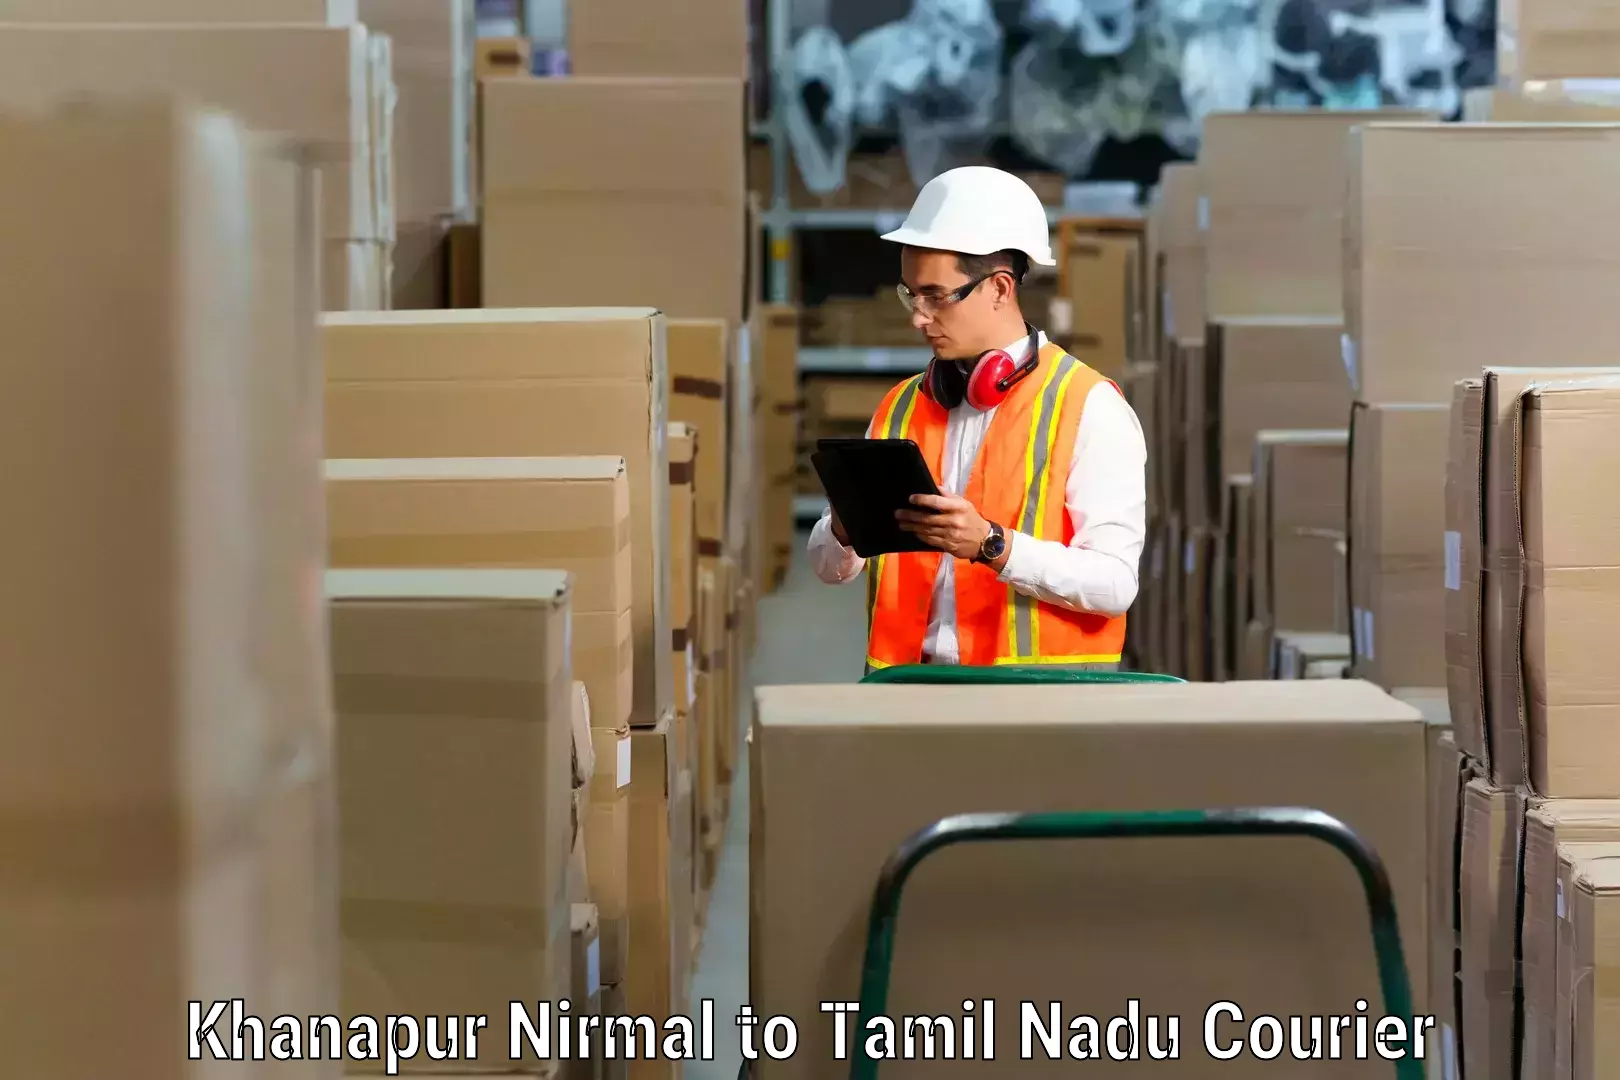 Reliable relocation services Khanapur Nirmal to Gudalur